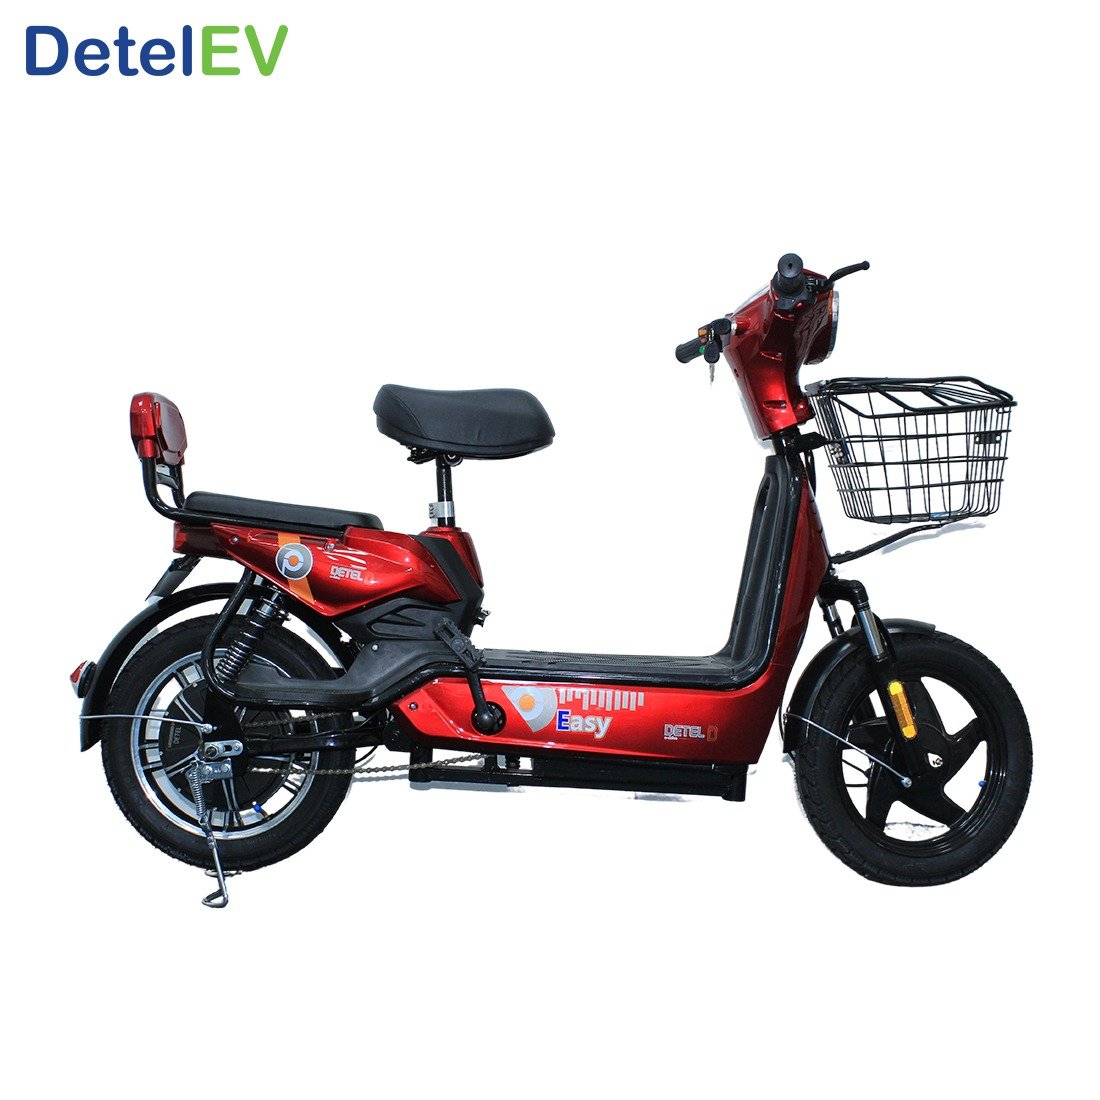 Detel Easy – world’s cheapest Ev two-wheel launched in India for just Rs. 19,999